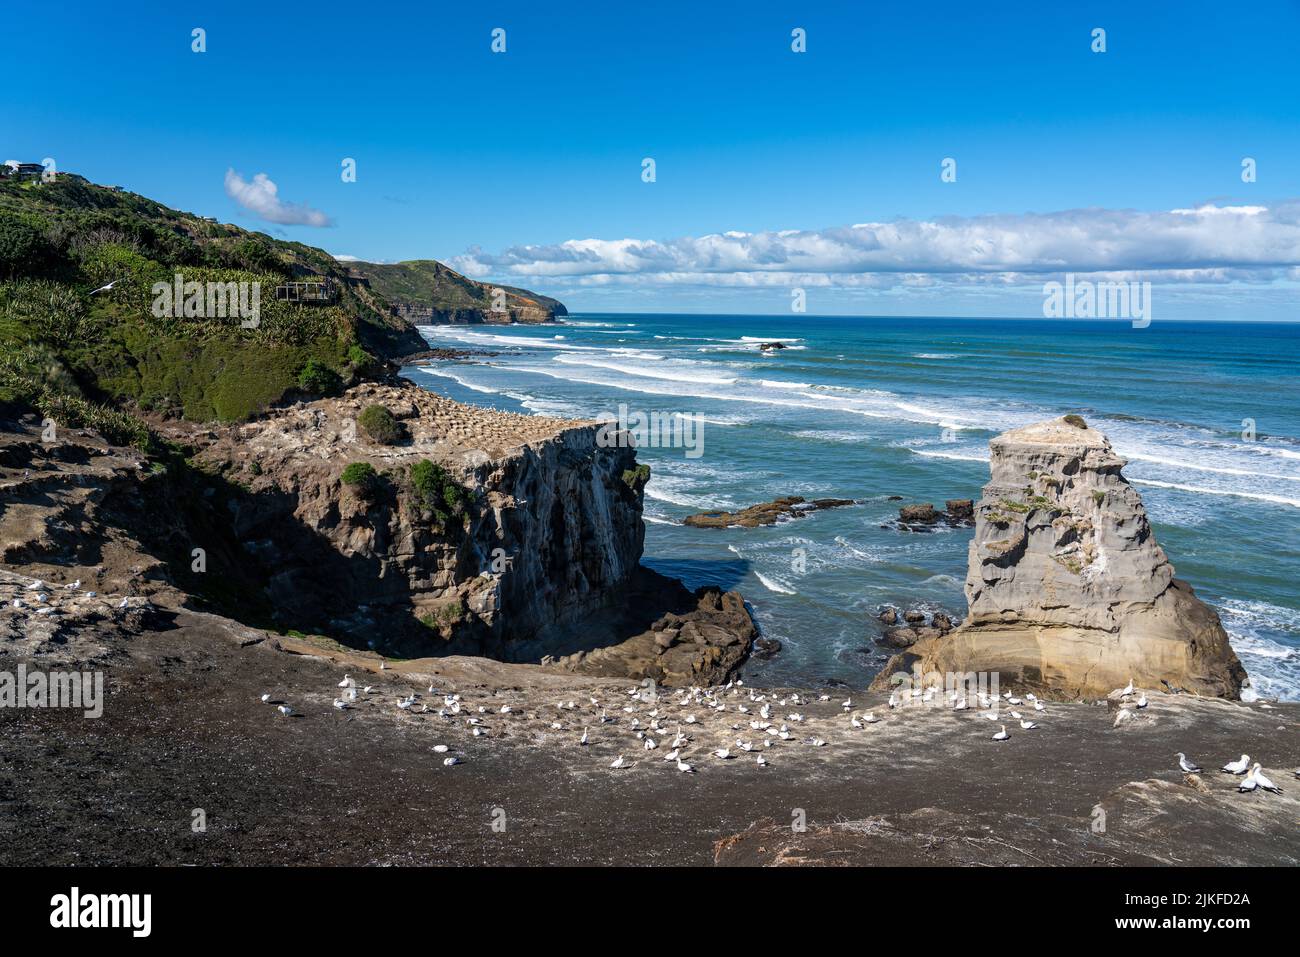 A beautiful view of the Muriwai Beach on a sunny day in New Zealand Stock Photo